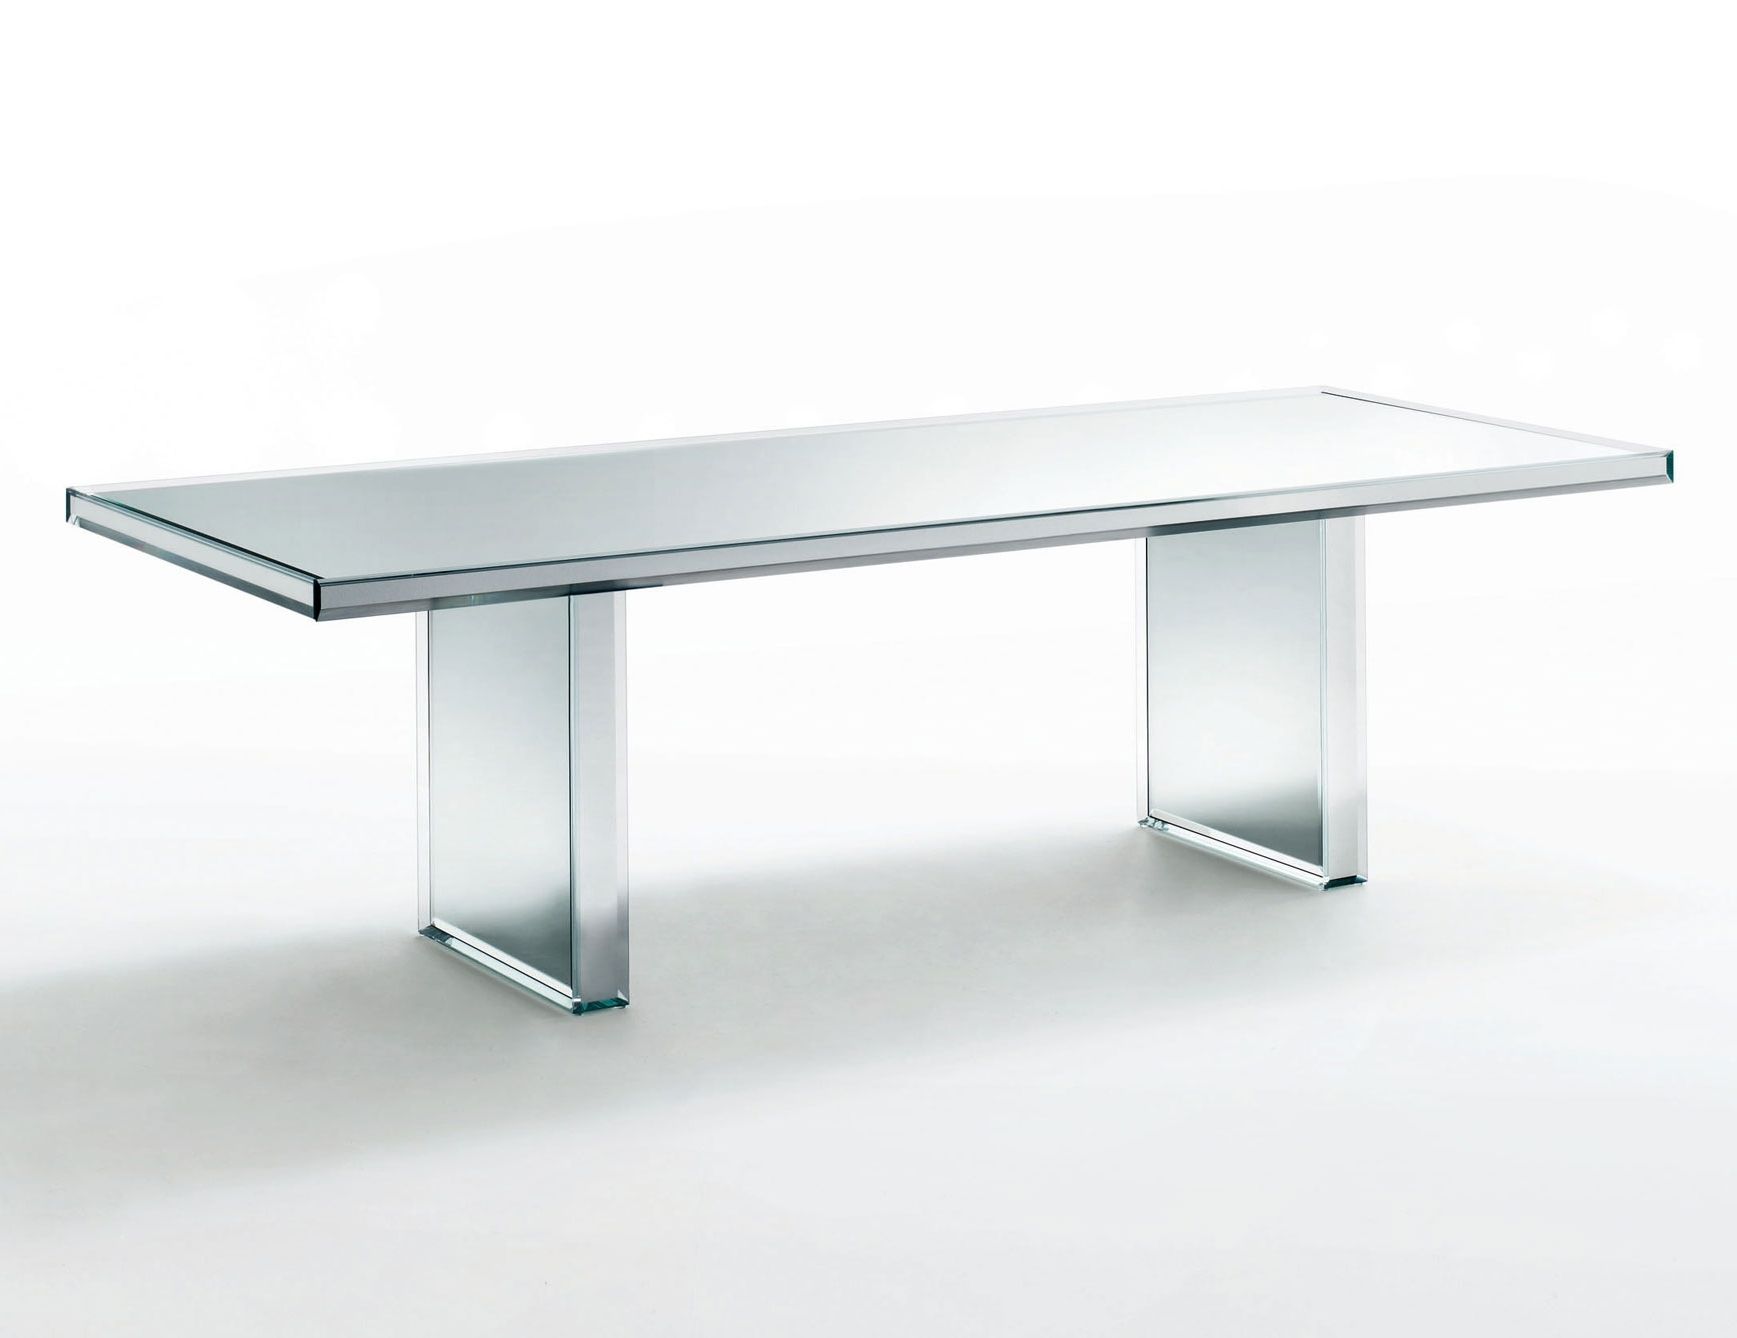 Nella Vetrina Glas Italia Prism Mirror Transparent Dining Table Within Current Mirror Glass Dining Tables (View 13 of 25)